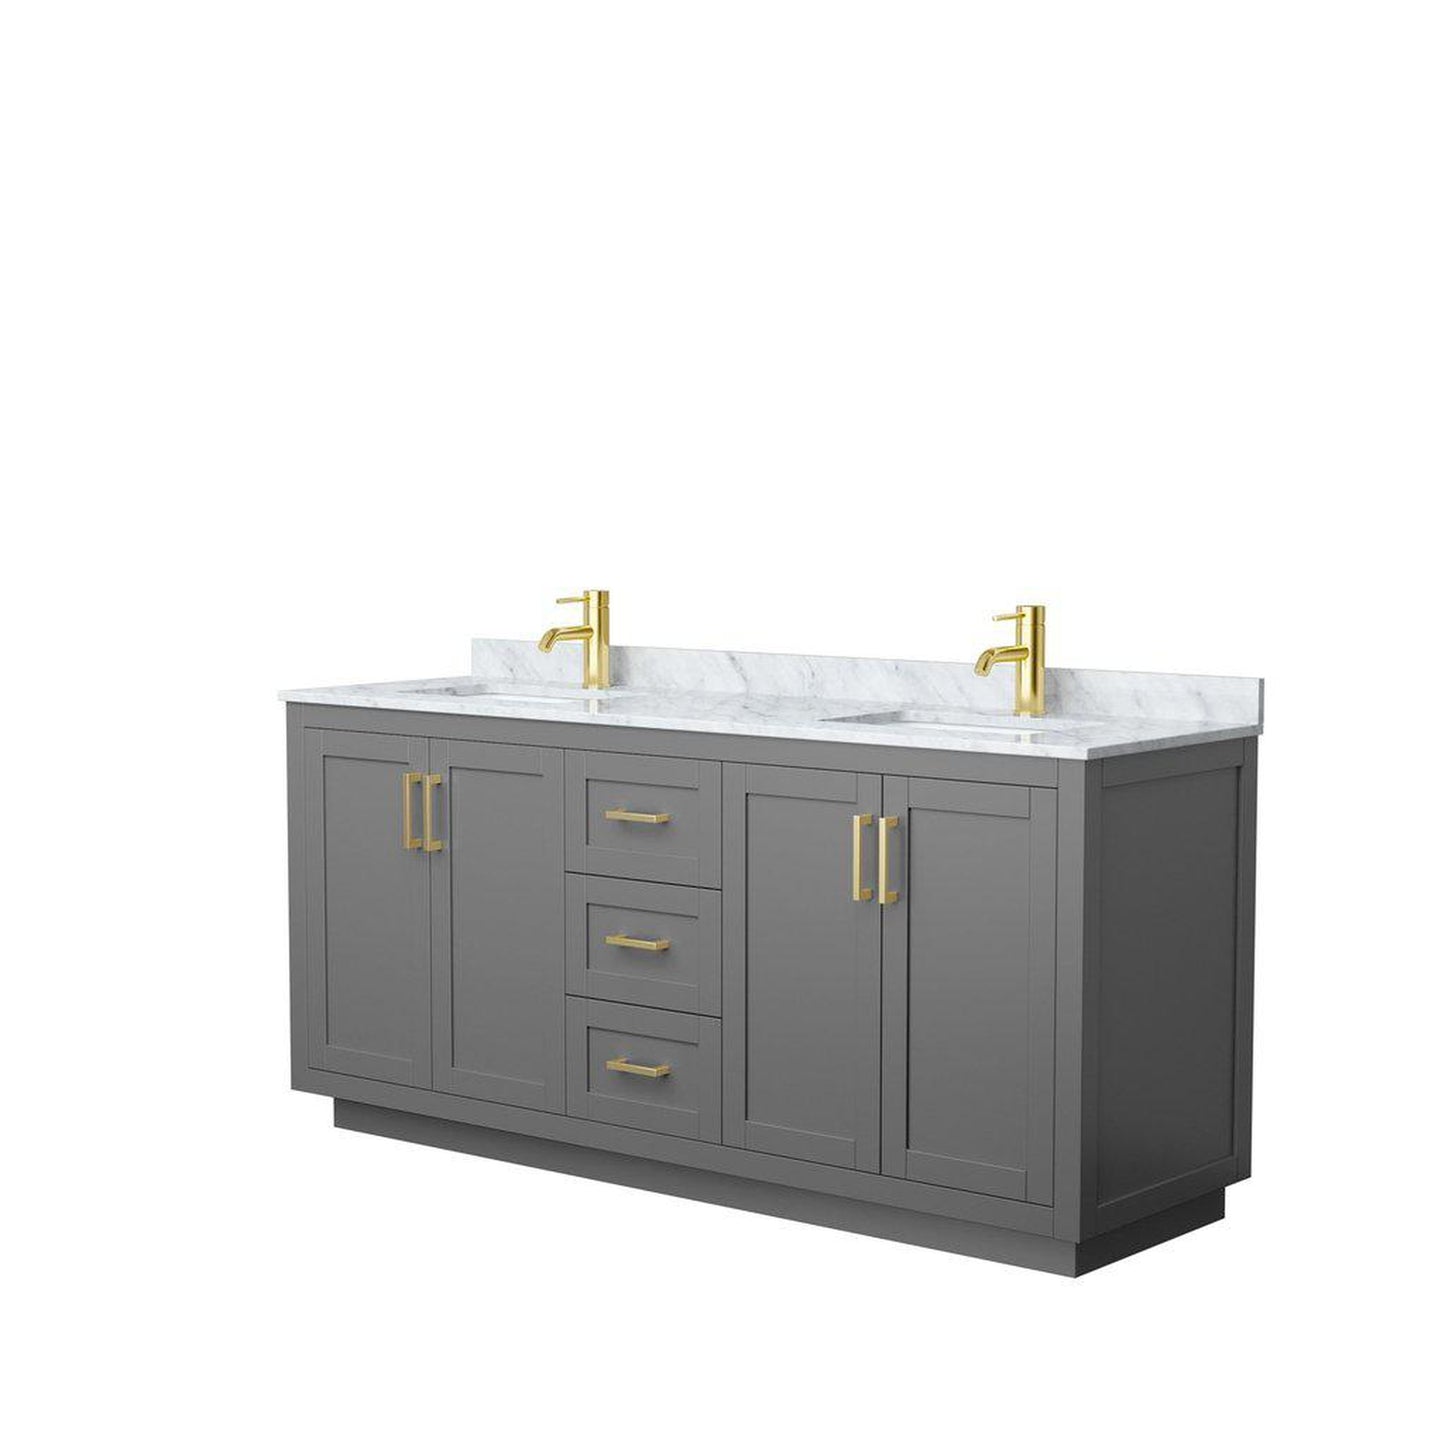 Wyndham Collection Miranda 72" Double Bathroom Dark Gray Vanity Set With White Carrara Marble Countertop, Undermount Square Sink, And Brushed Gold Trim